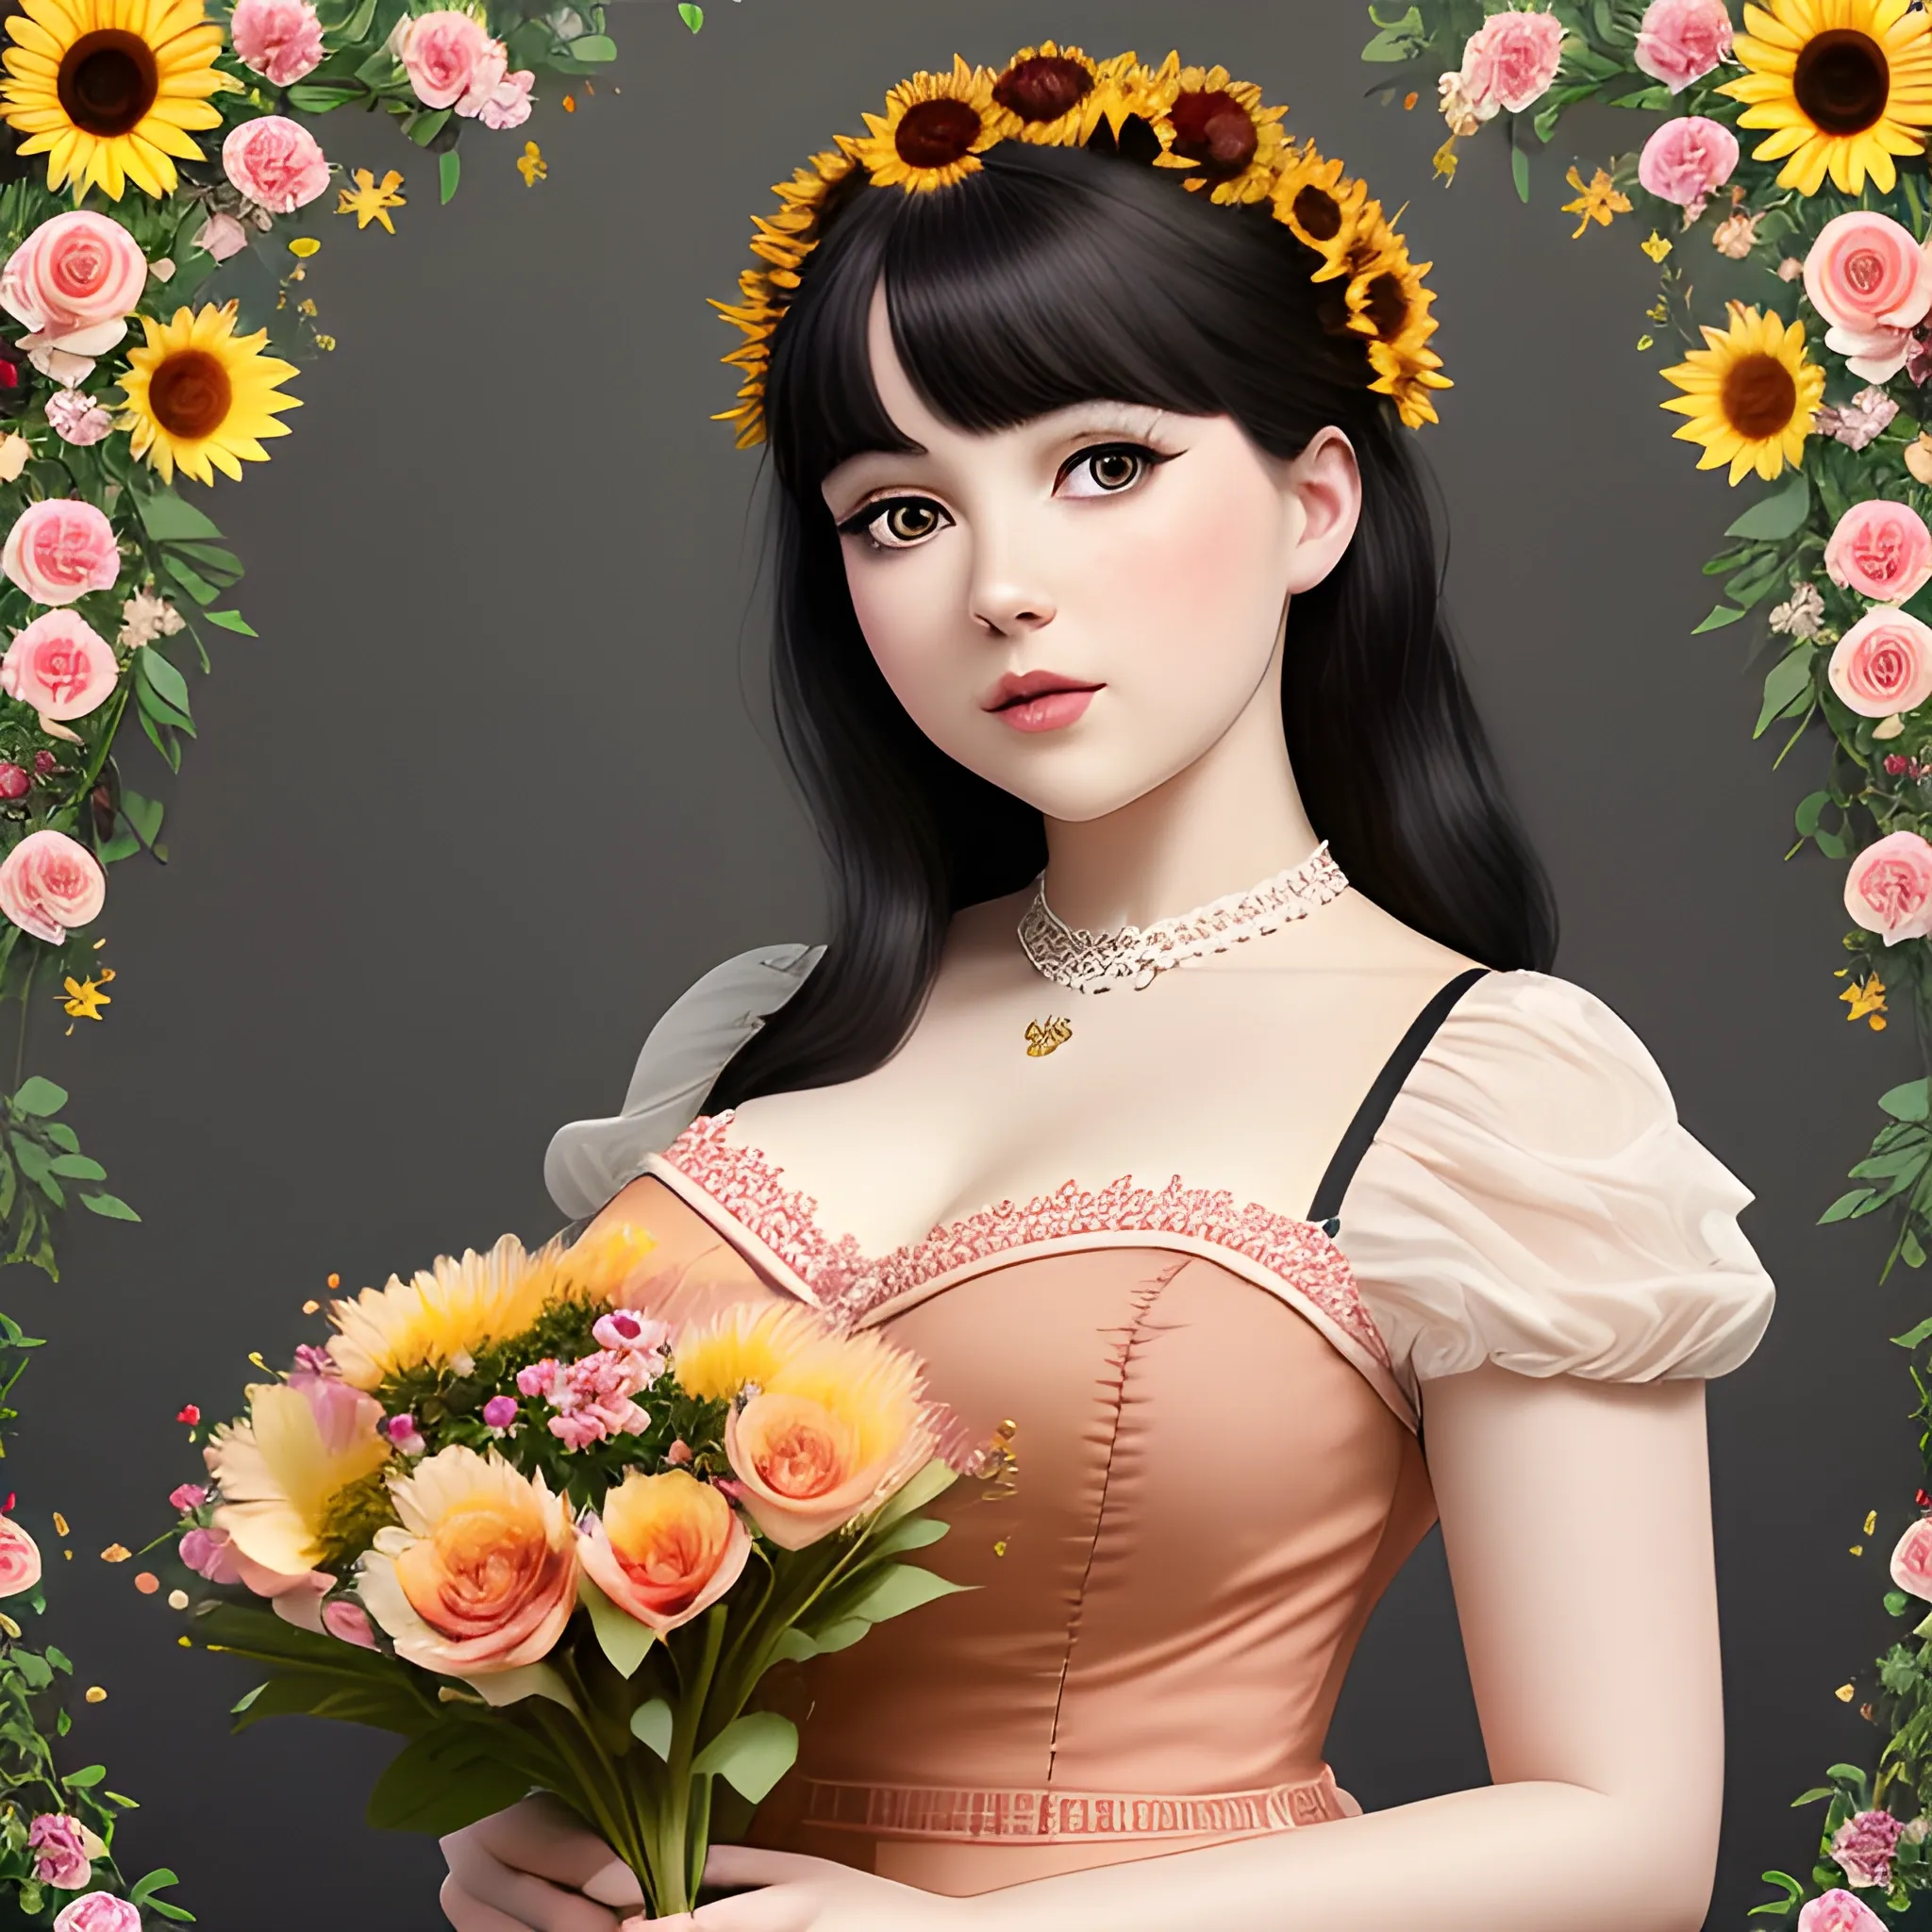 (((high detail))), best quality, Warm Colors, (detailed), (high resolution)Black-haired female, curvy face, with rosy cheeks, big black eyes, thick eyelashes, thick peach lips, thick eyebrows, nose upturned, lying on dark water, holding a bouquet of flowers, a sunflower, a rose, a jasmine, a cherry blossom, a white lotus, wearing a red lace dress.